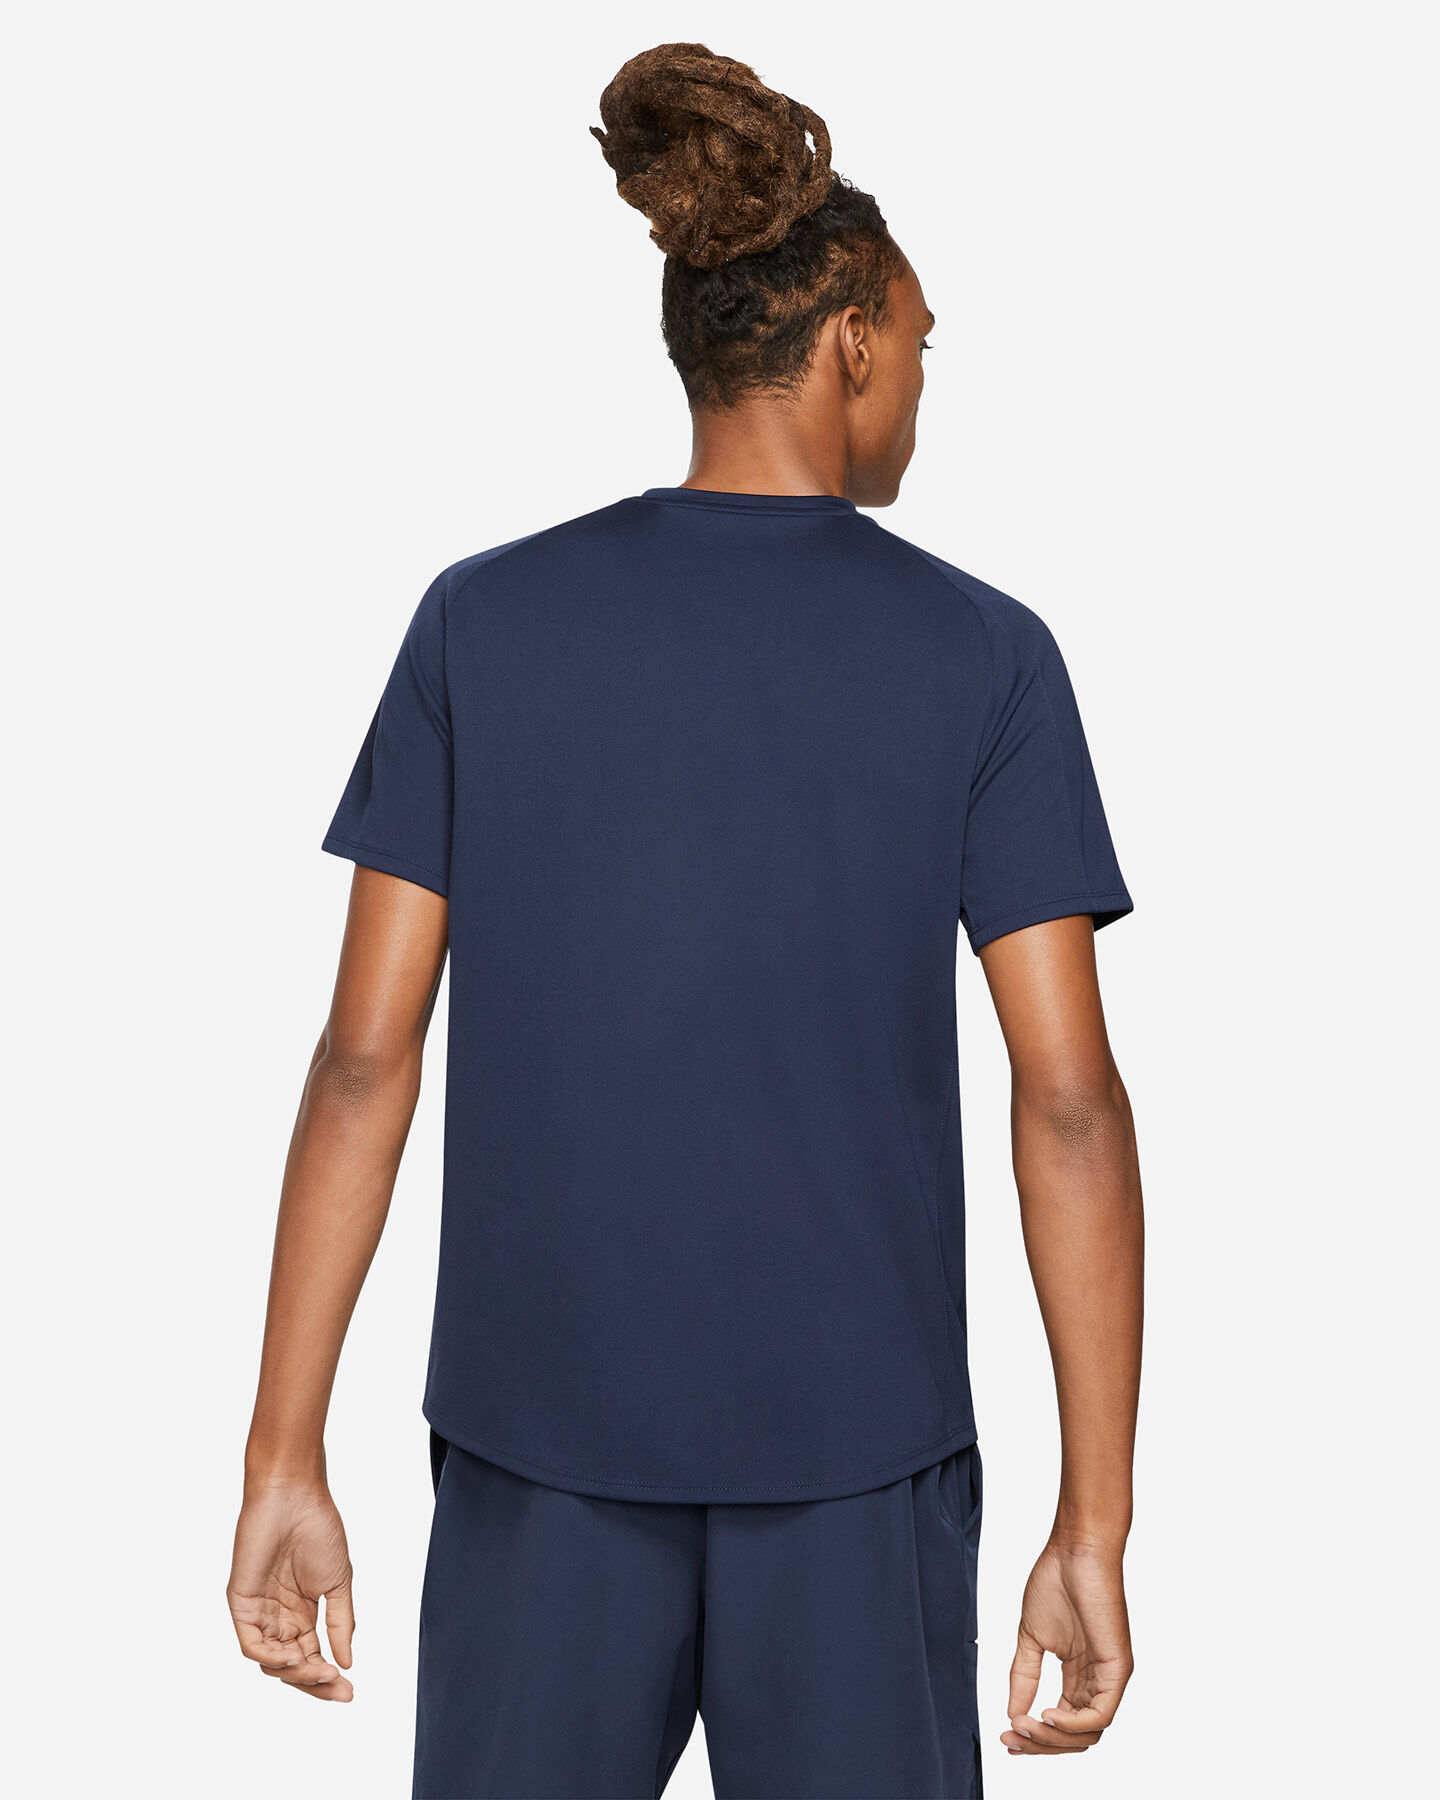  T-Shirt tennis NIKE VICTORY M S5268964 scatto 1